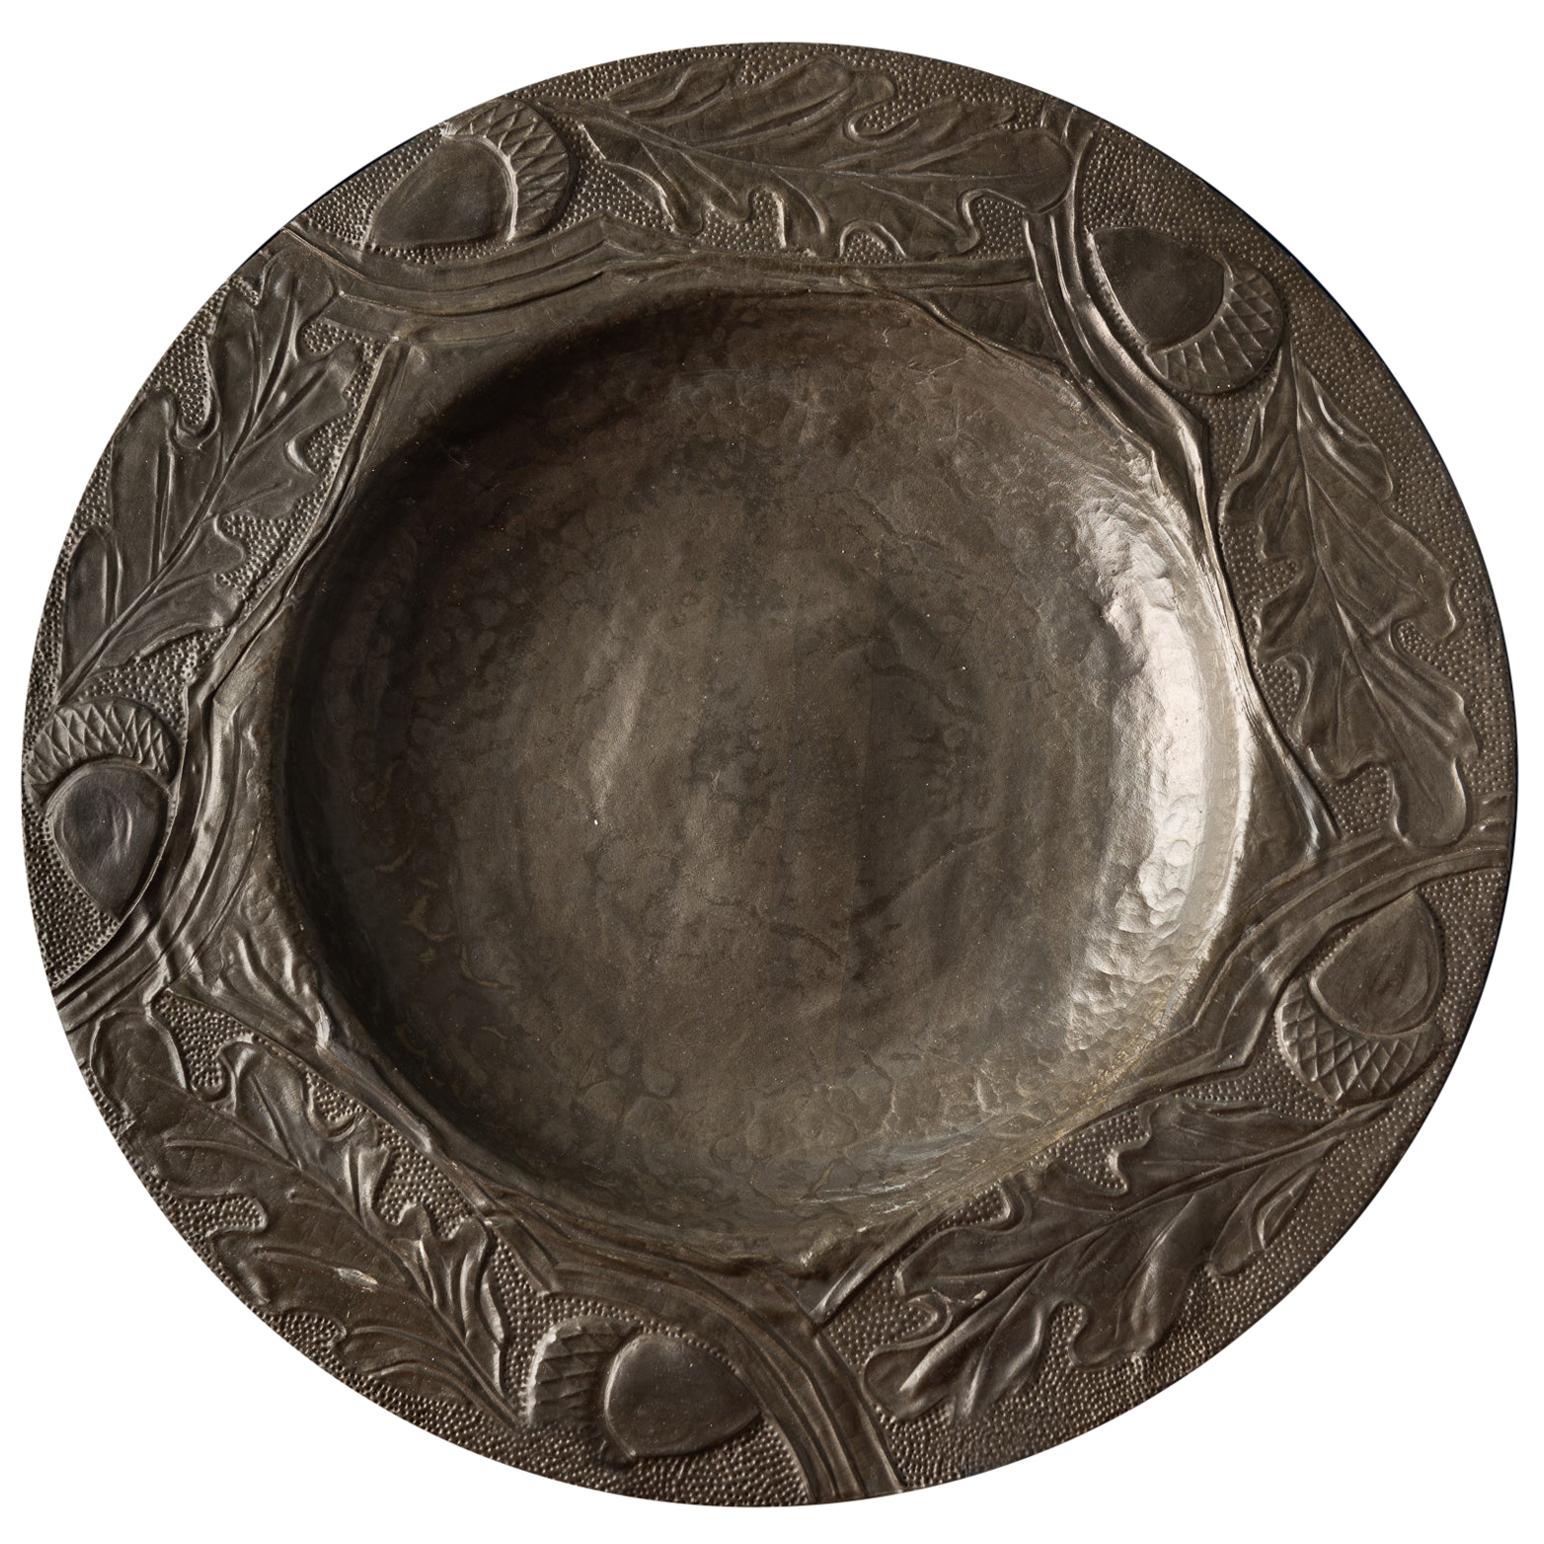 Antique Decorative Pewter Plate with Leaves and Acorns For Sale